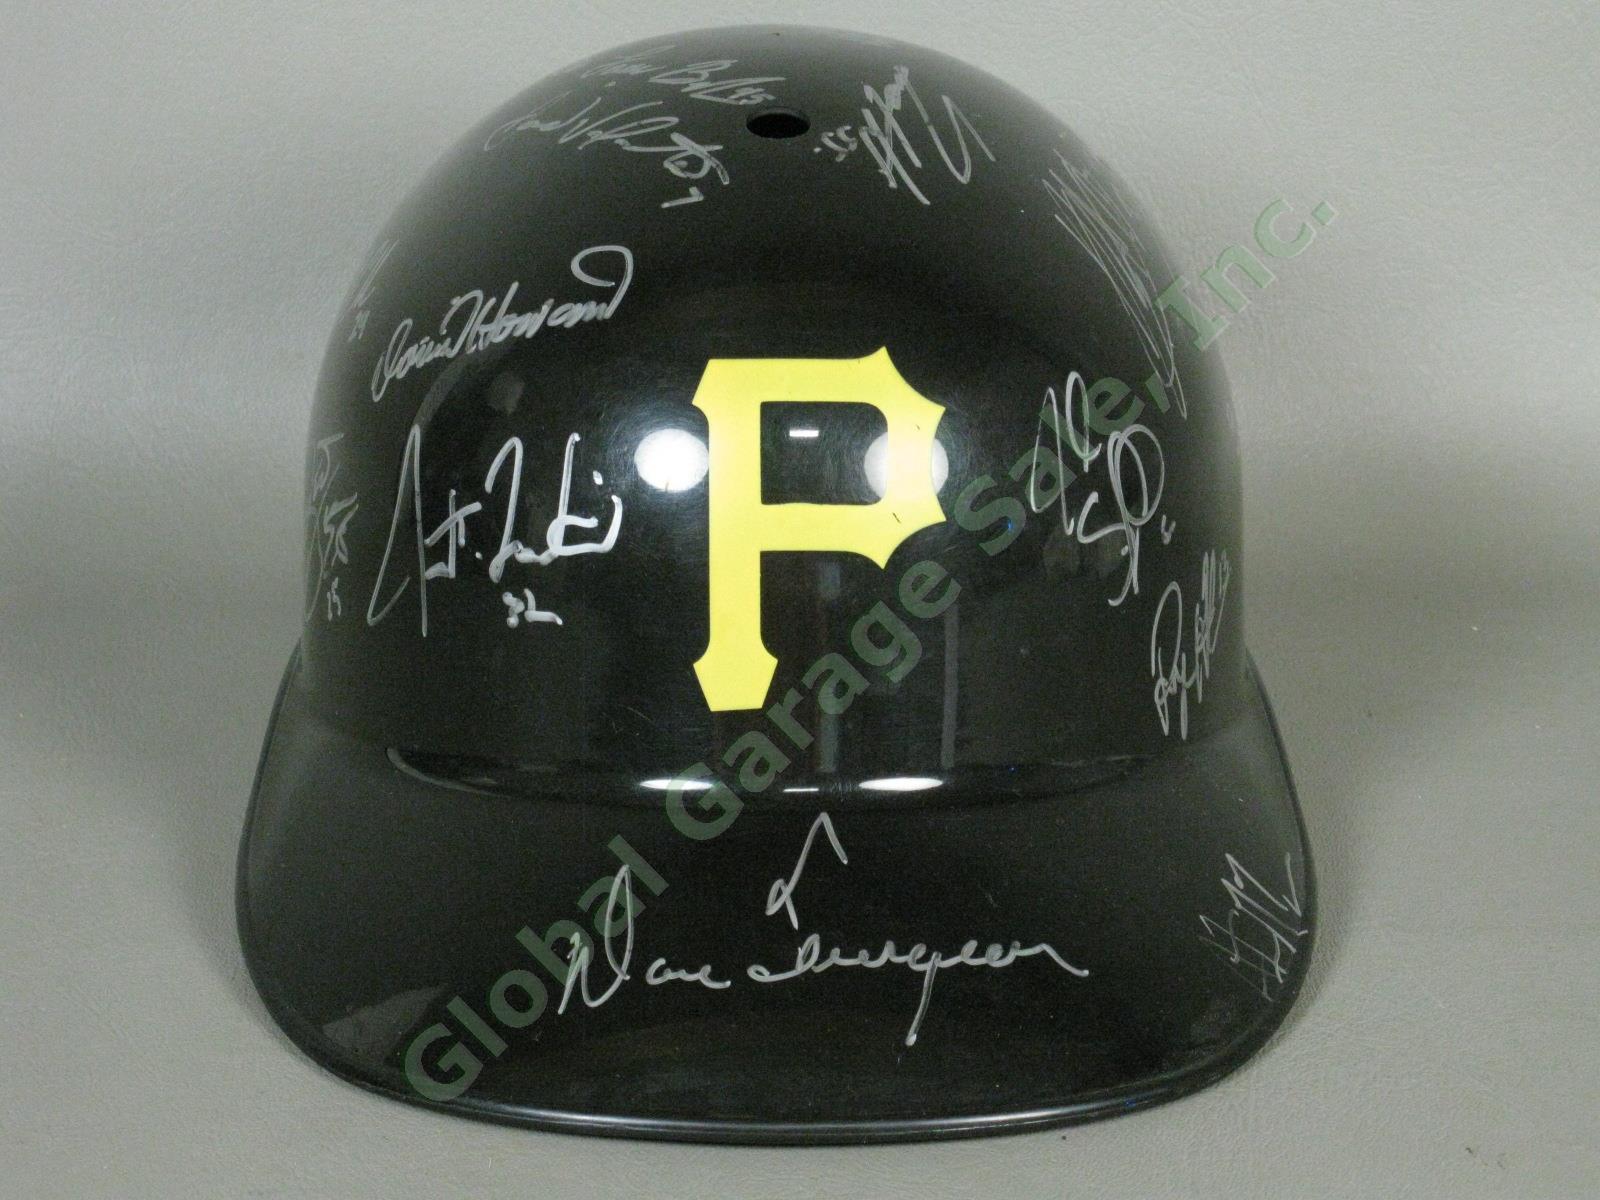 2012 State College Spikes Team Signed Baseball Helmet NYPL Pittsburgh Pirates NR